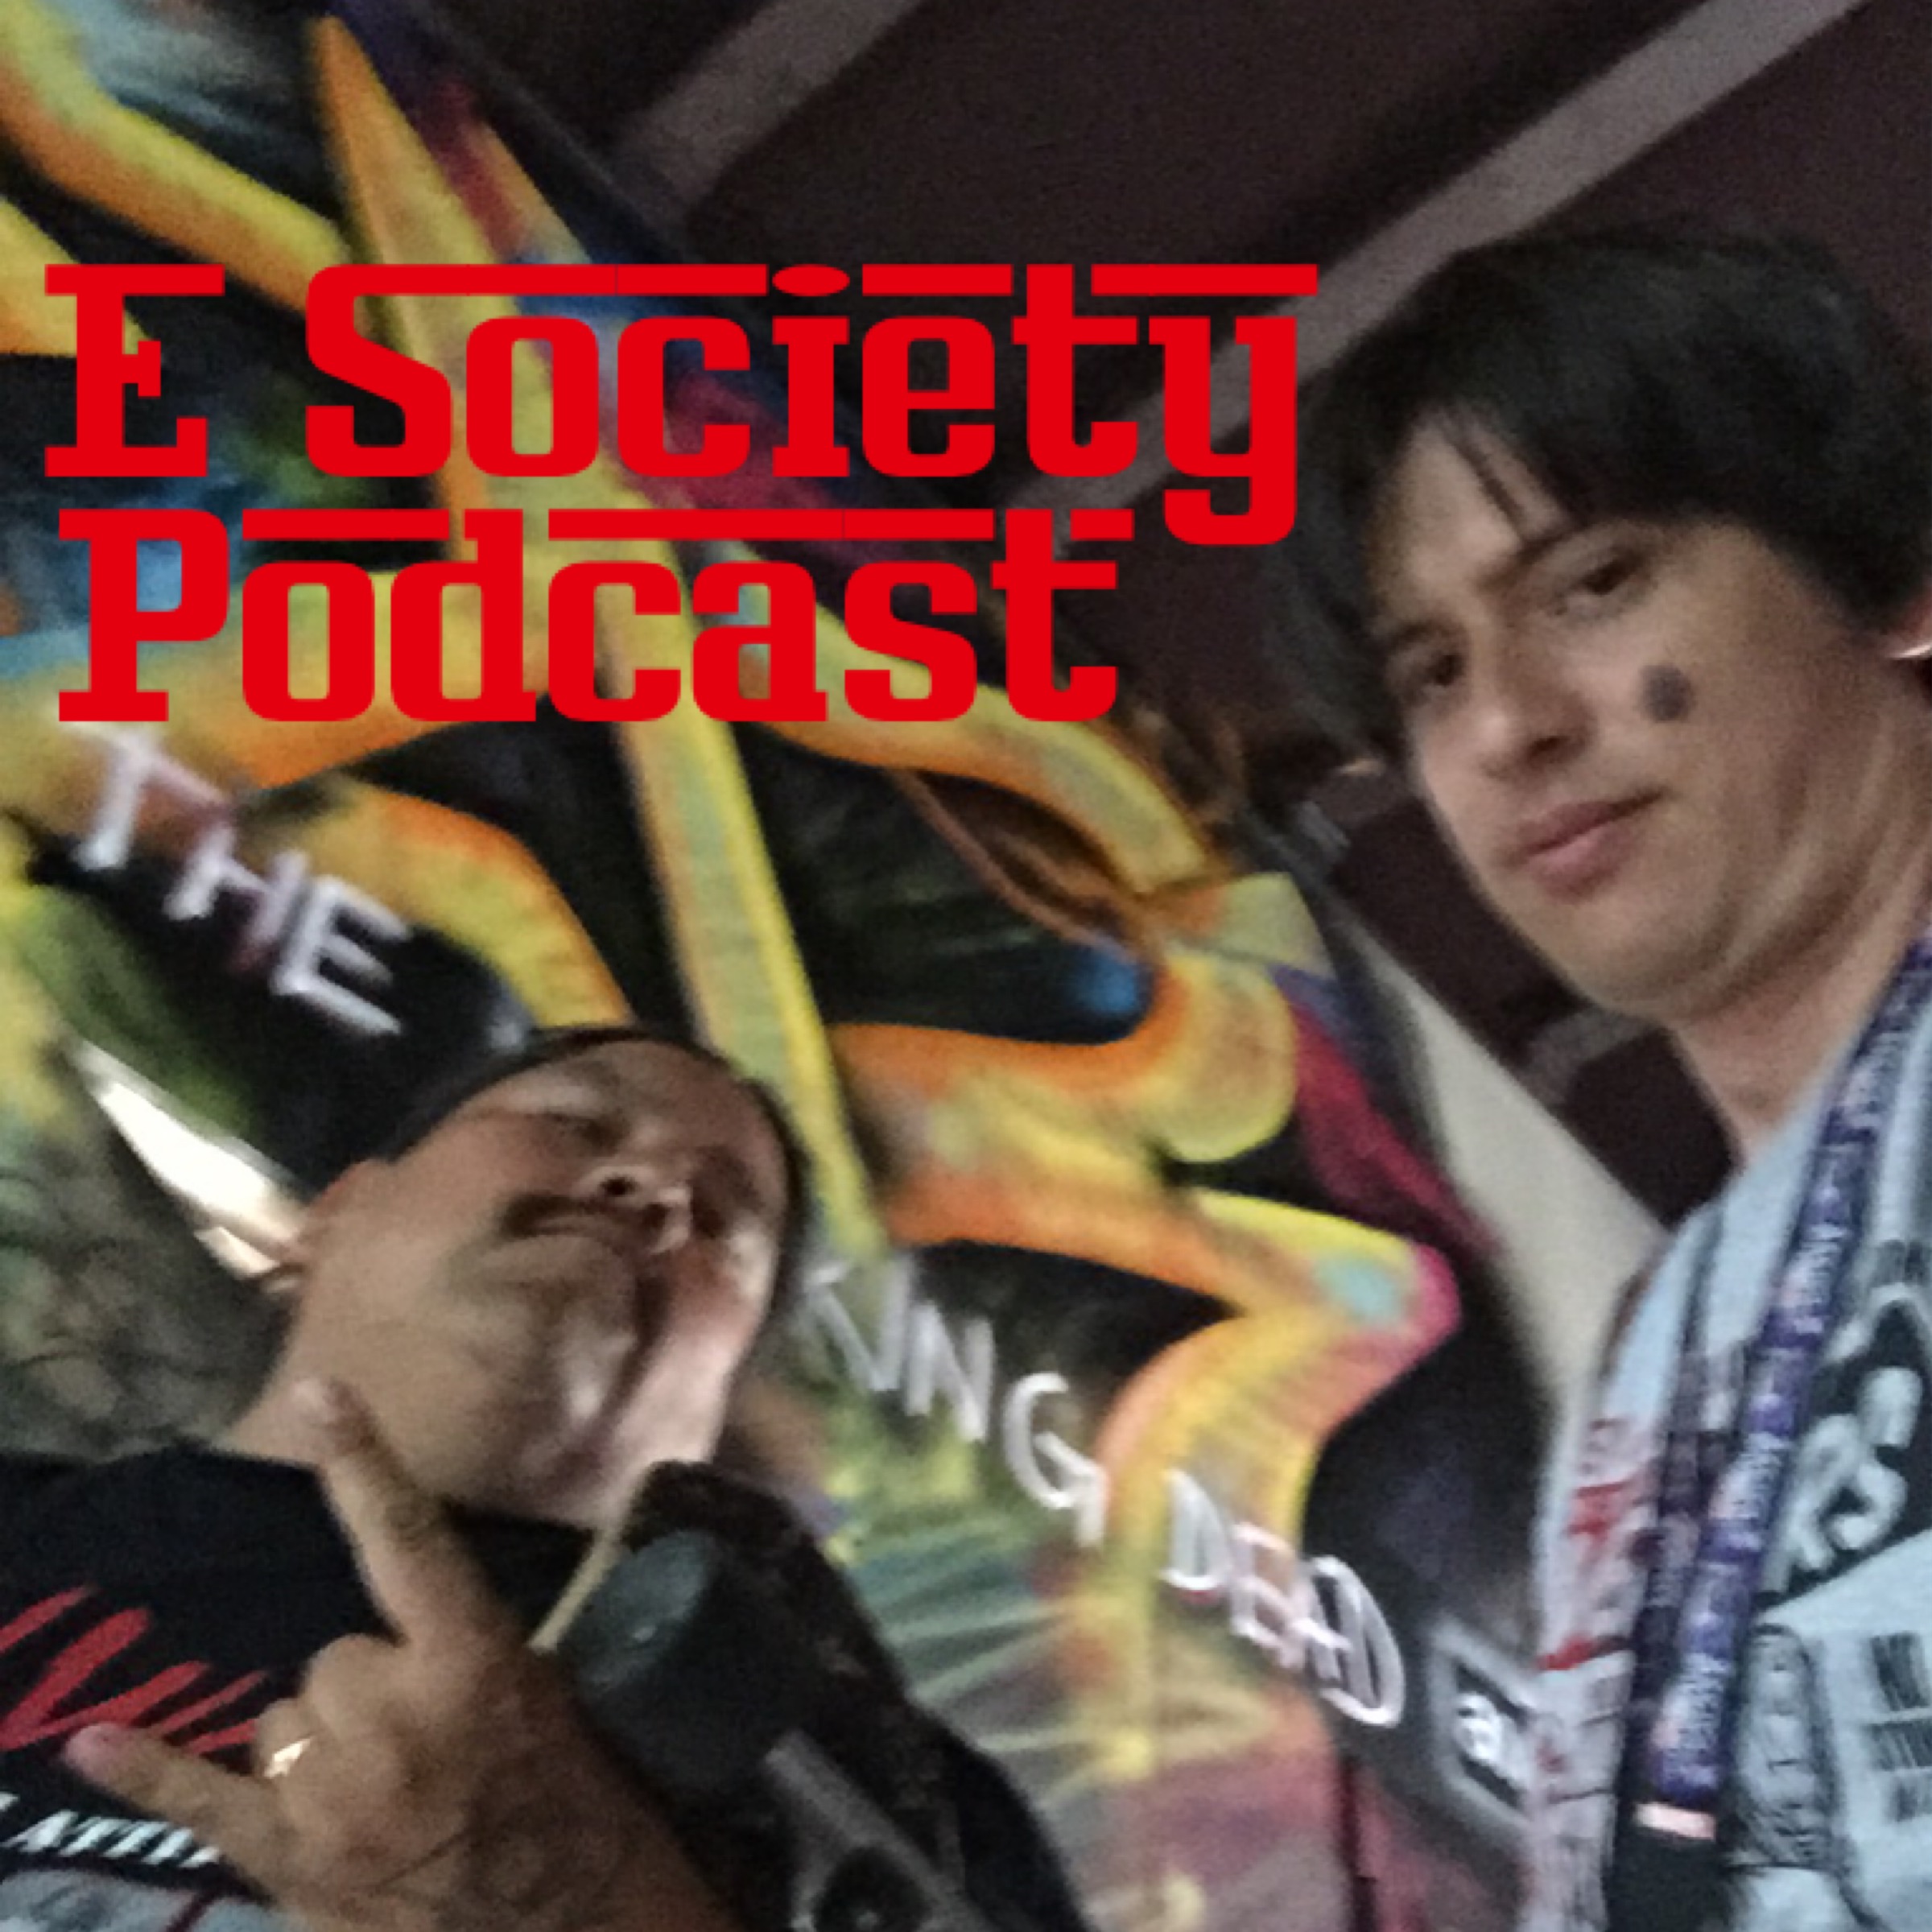 E Society Podcast - Ep. 89: Wrinkled strangers prey at night time after wrestling